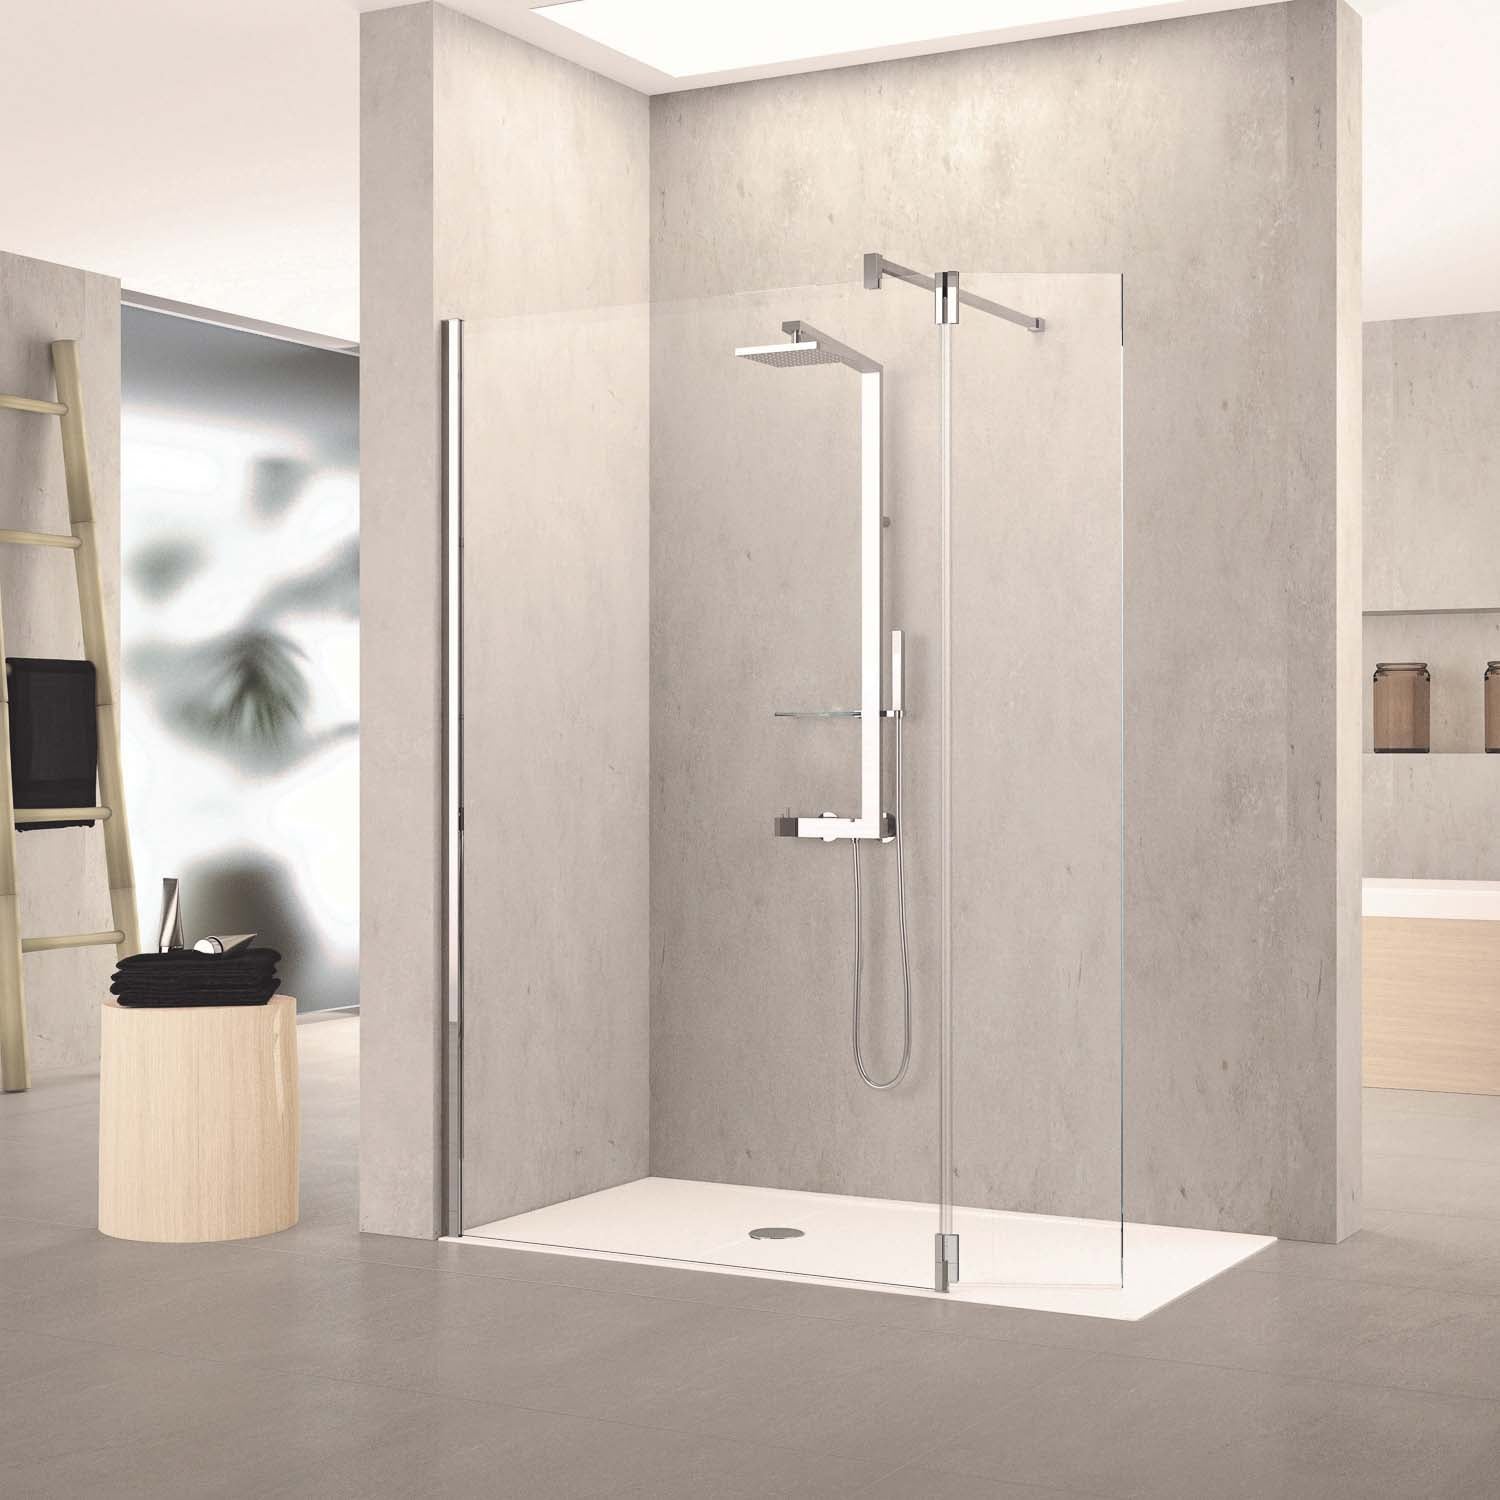 970-1000mm Ergo Wet Room Screen Clear Glass with a chrome finish lifestyle image